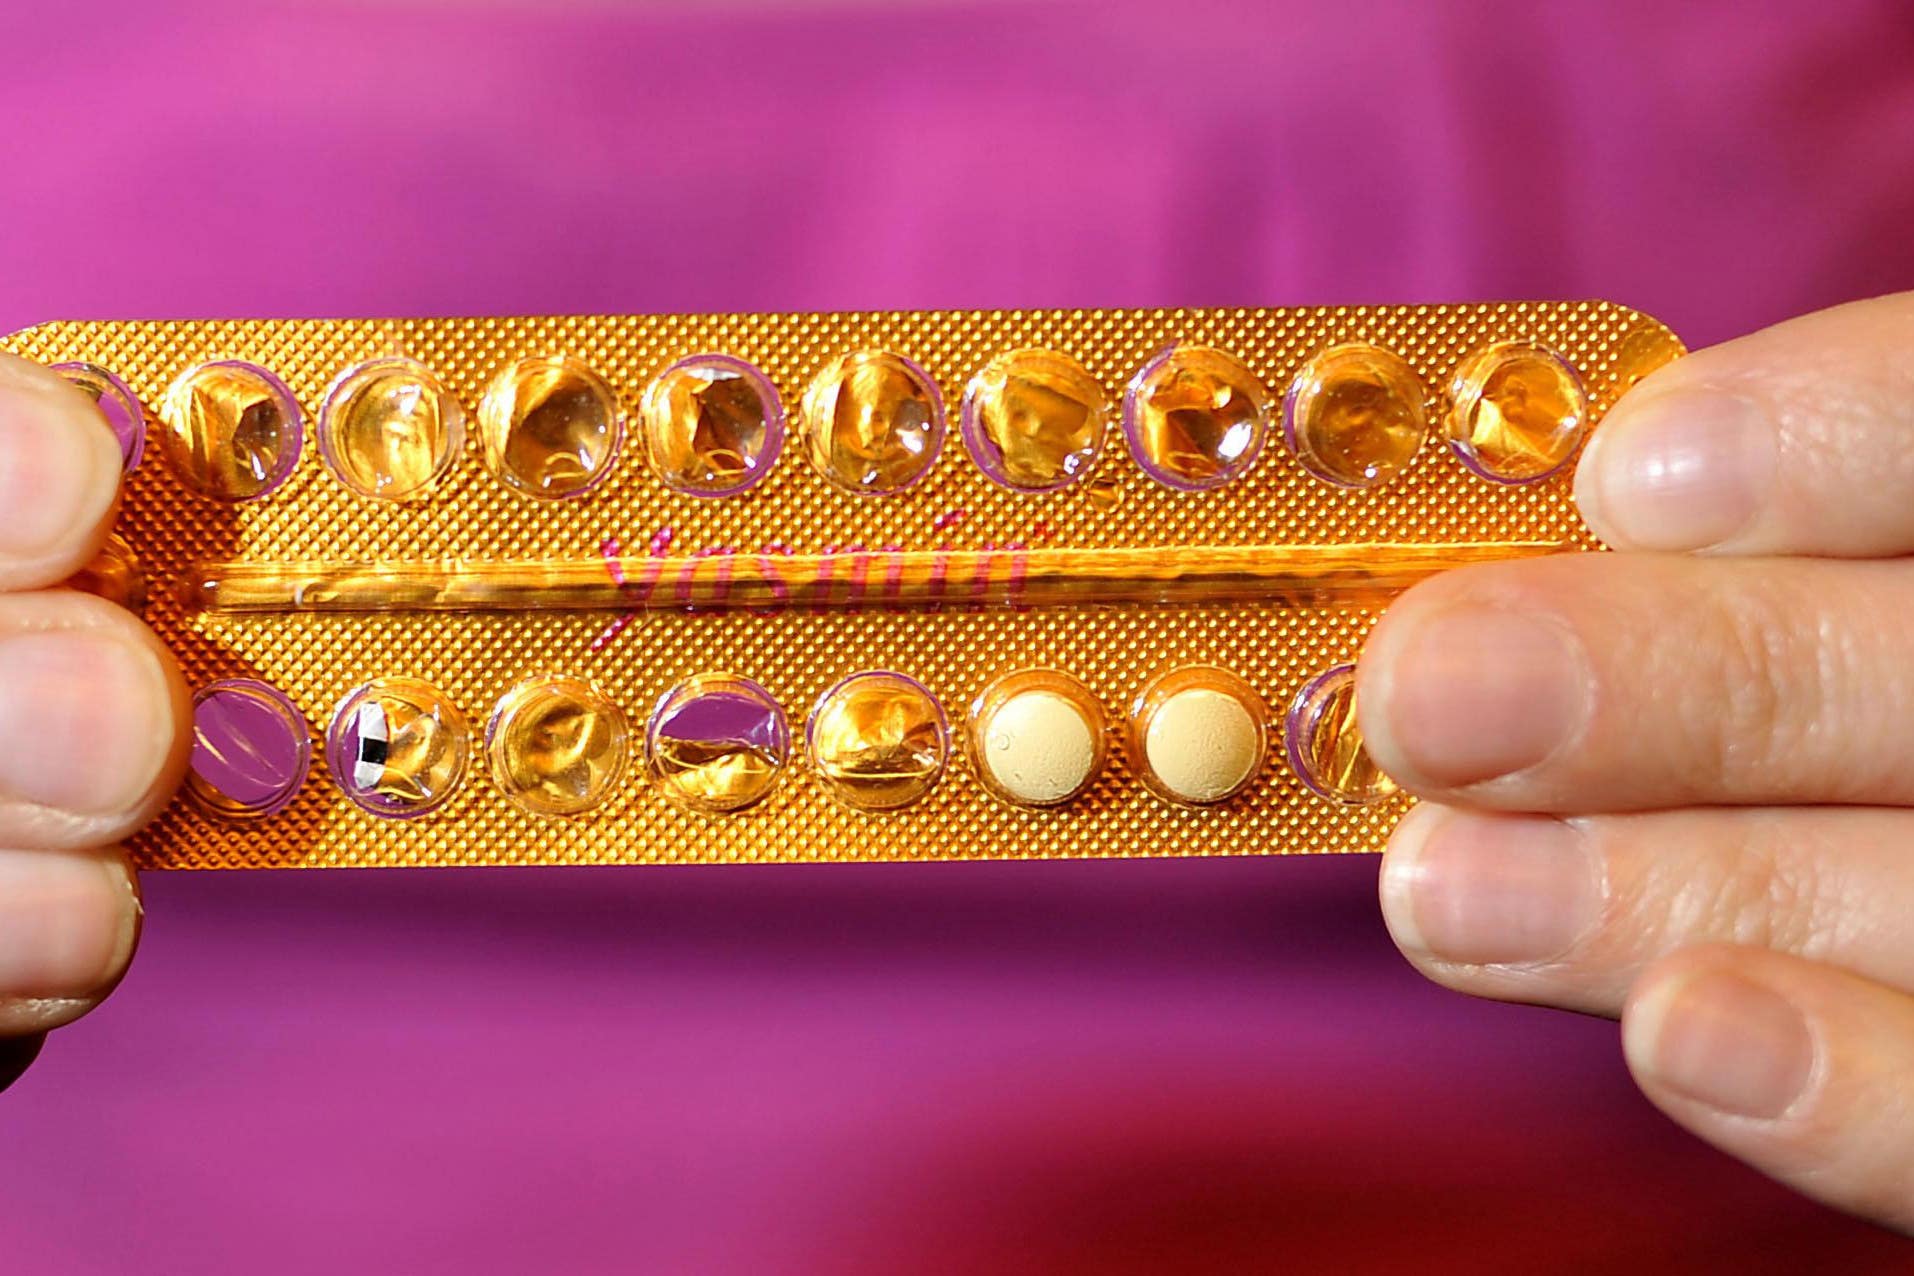 Women in New Zealand have been issued a warning over the contraceptive pill (Tim Ireland/PA)